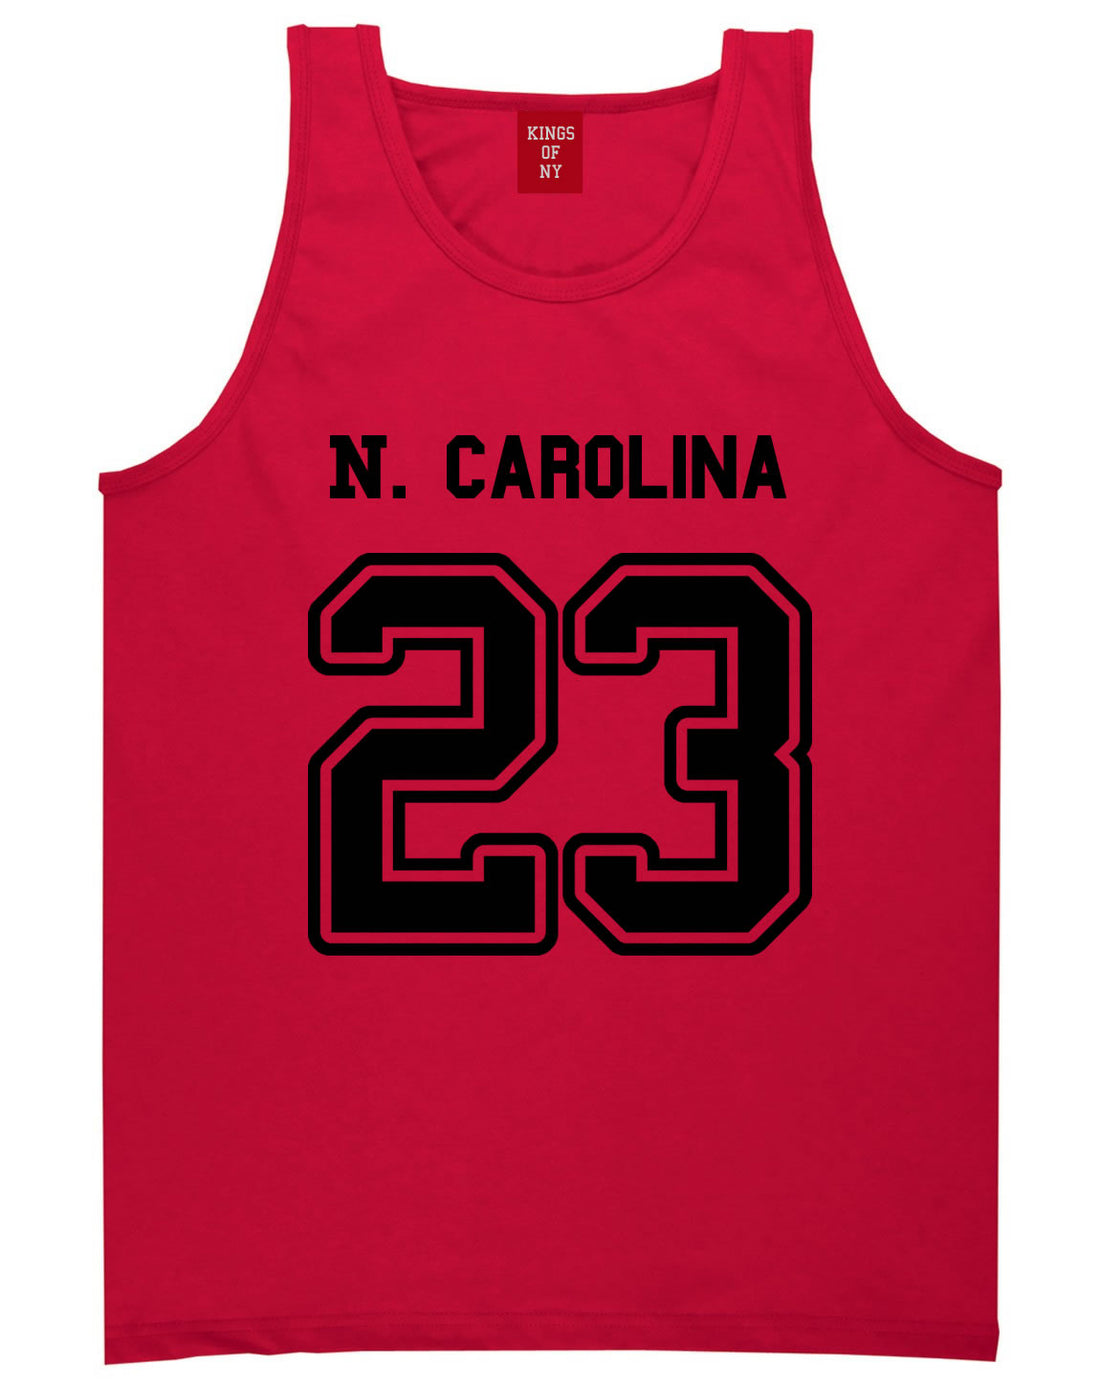 Sport Style North Carolina 23 Team State Jersey Mens Tank Top By Kings Of NY